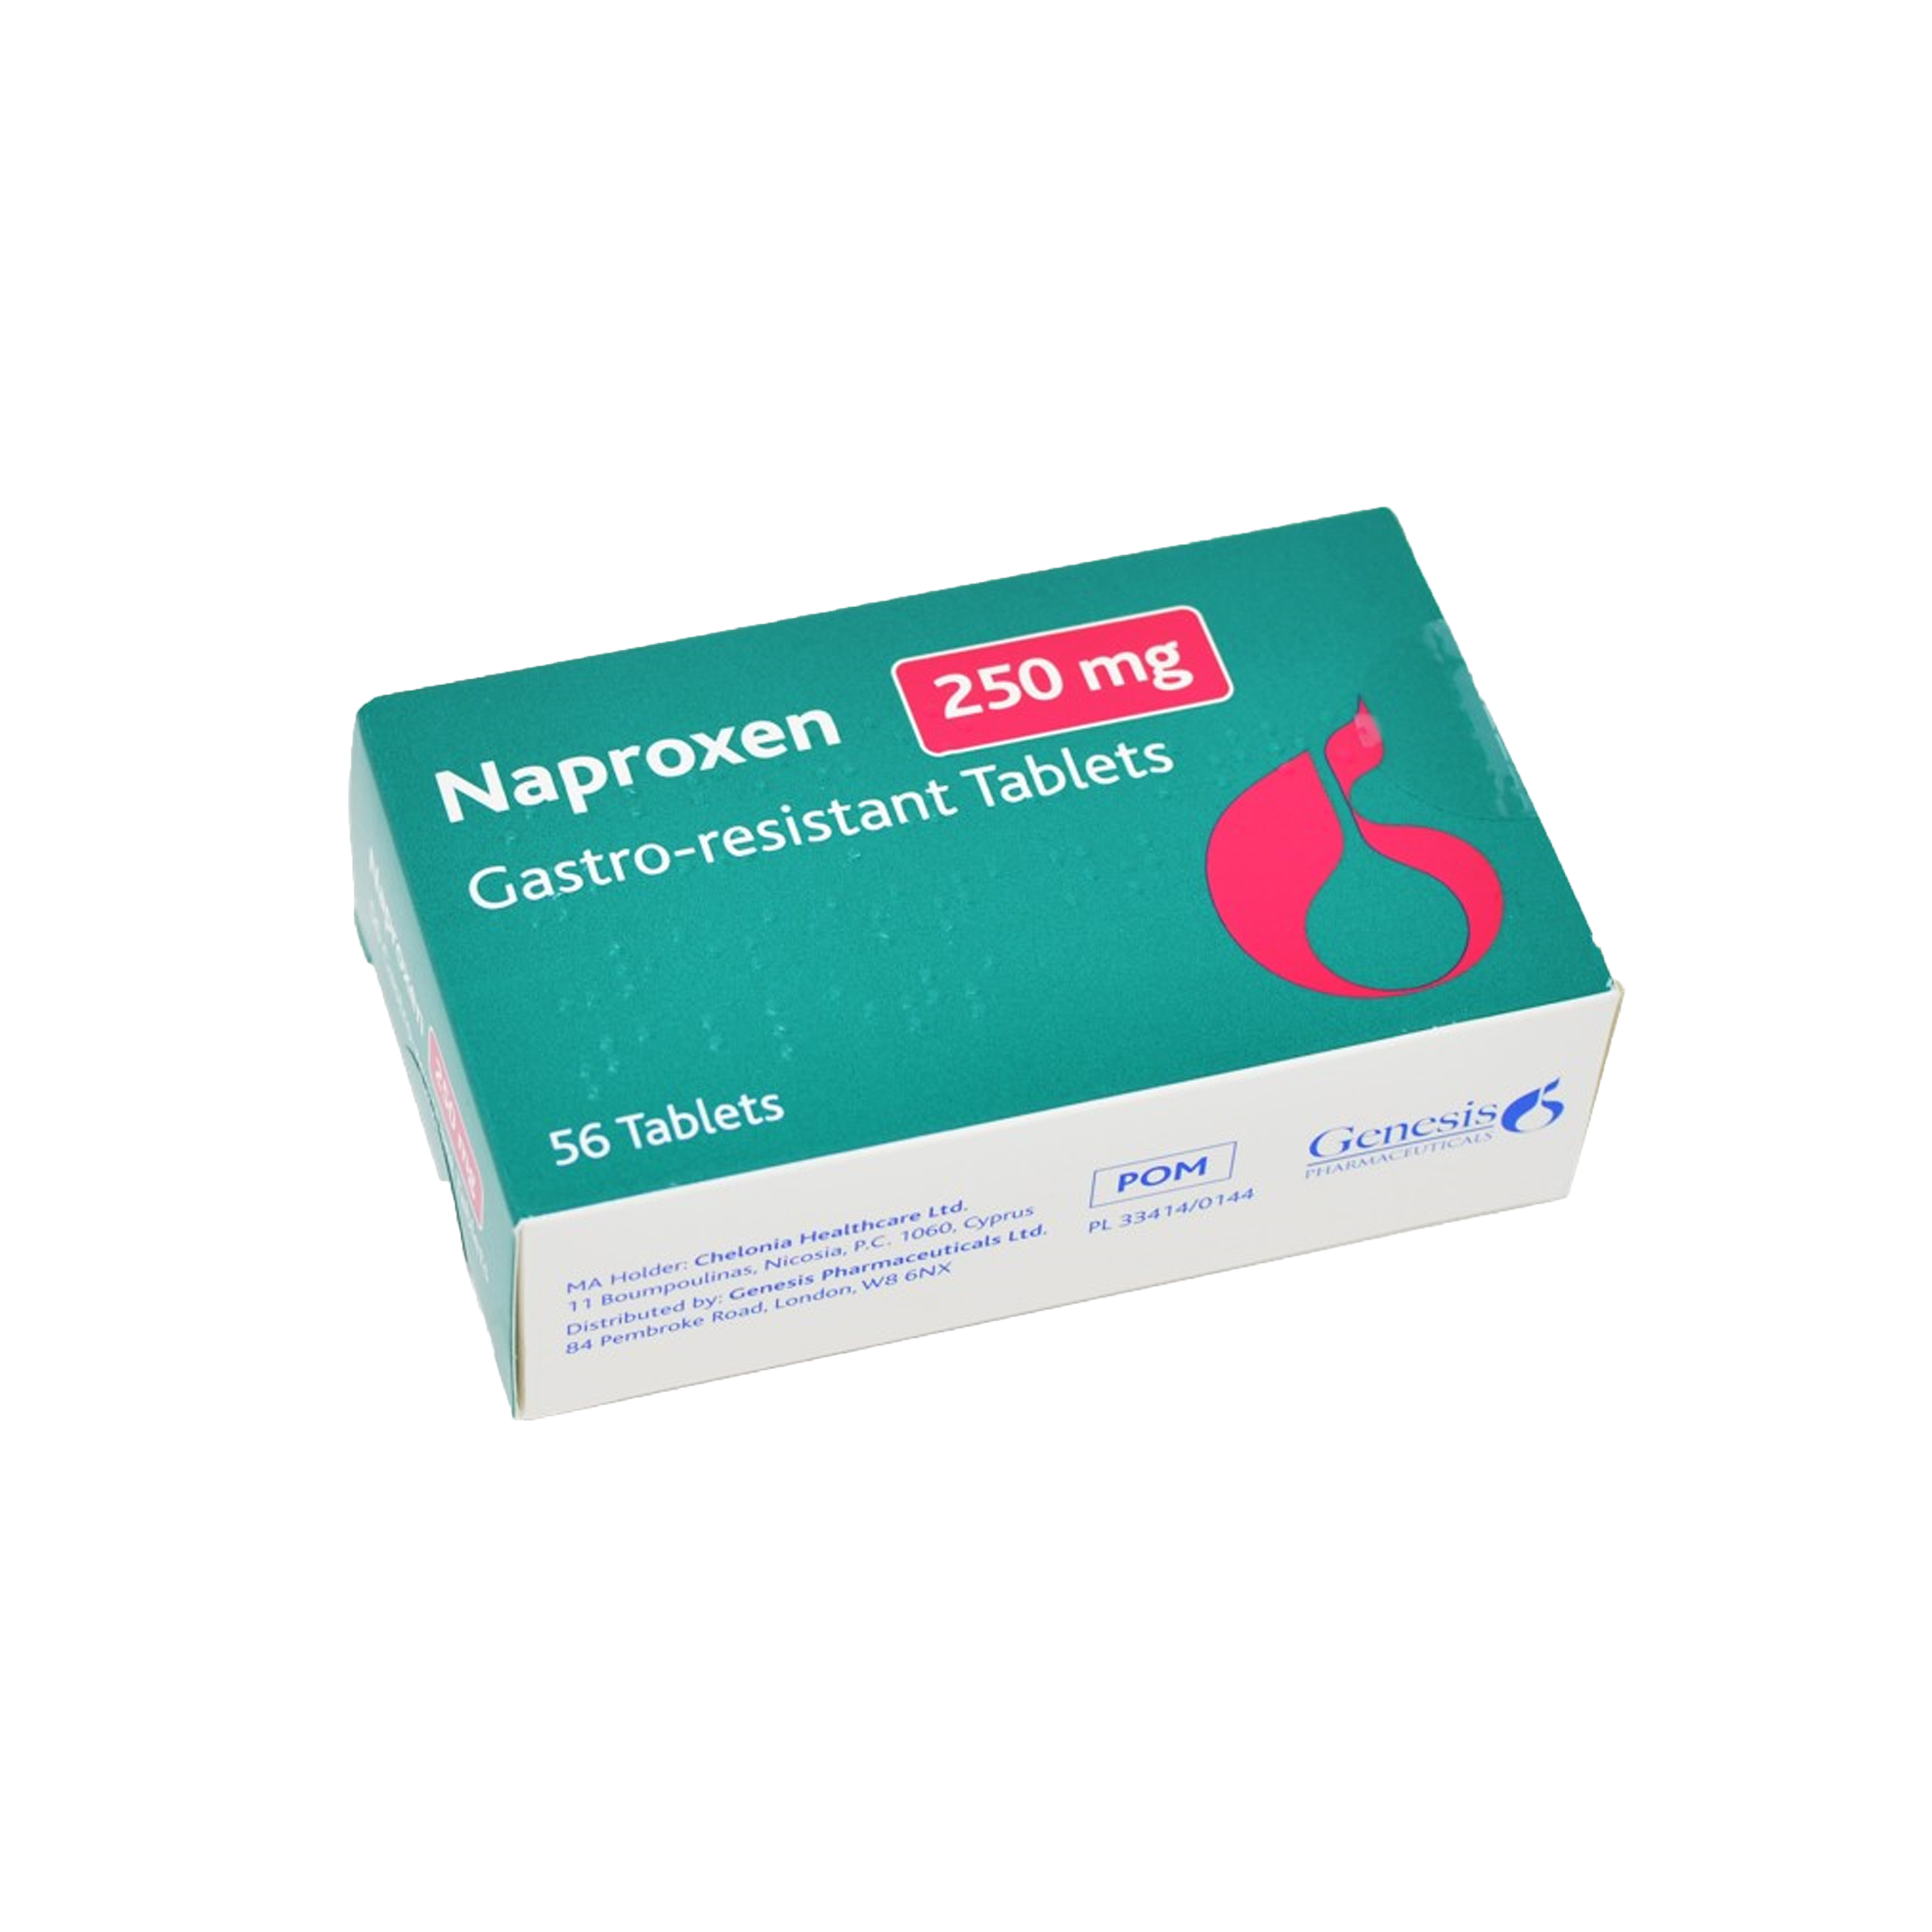 Naproxen 250mg Tablets - Joint and Muscle Pain